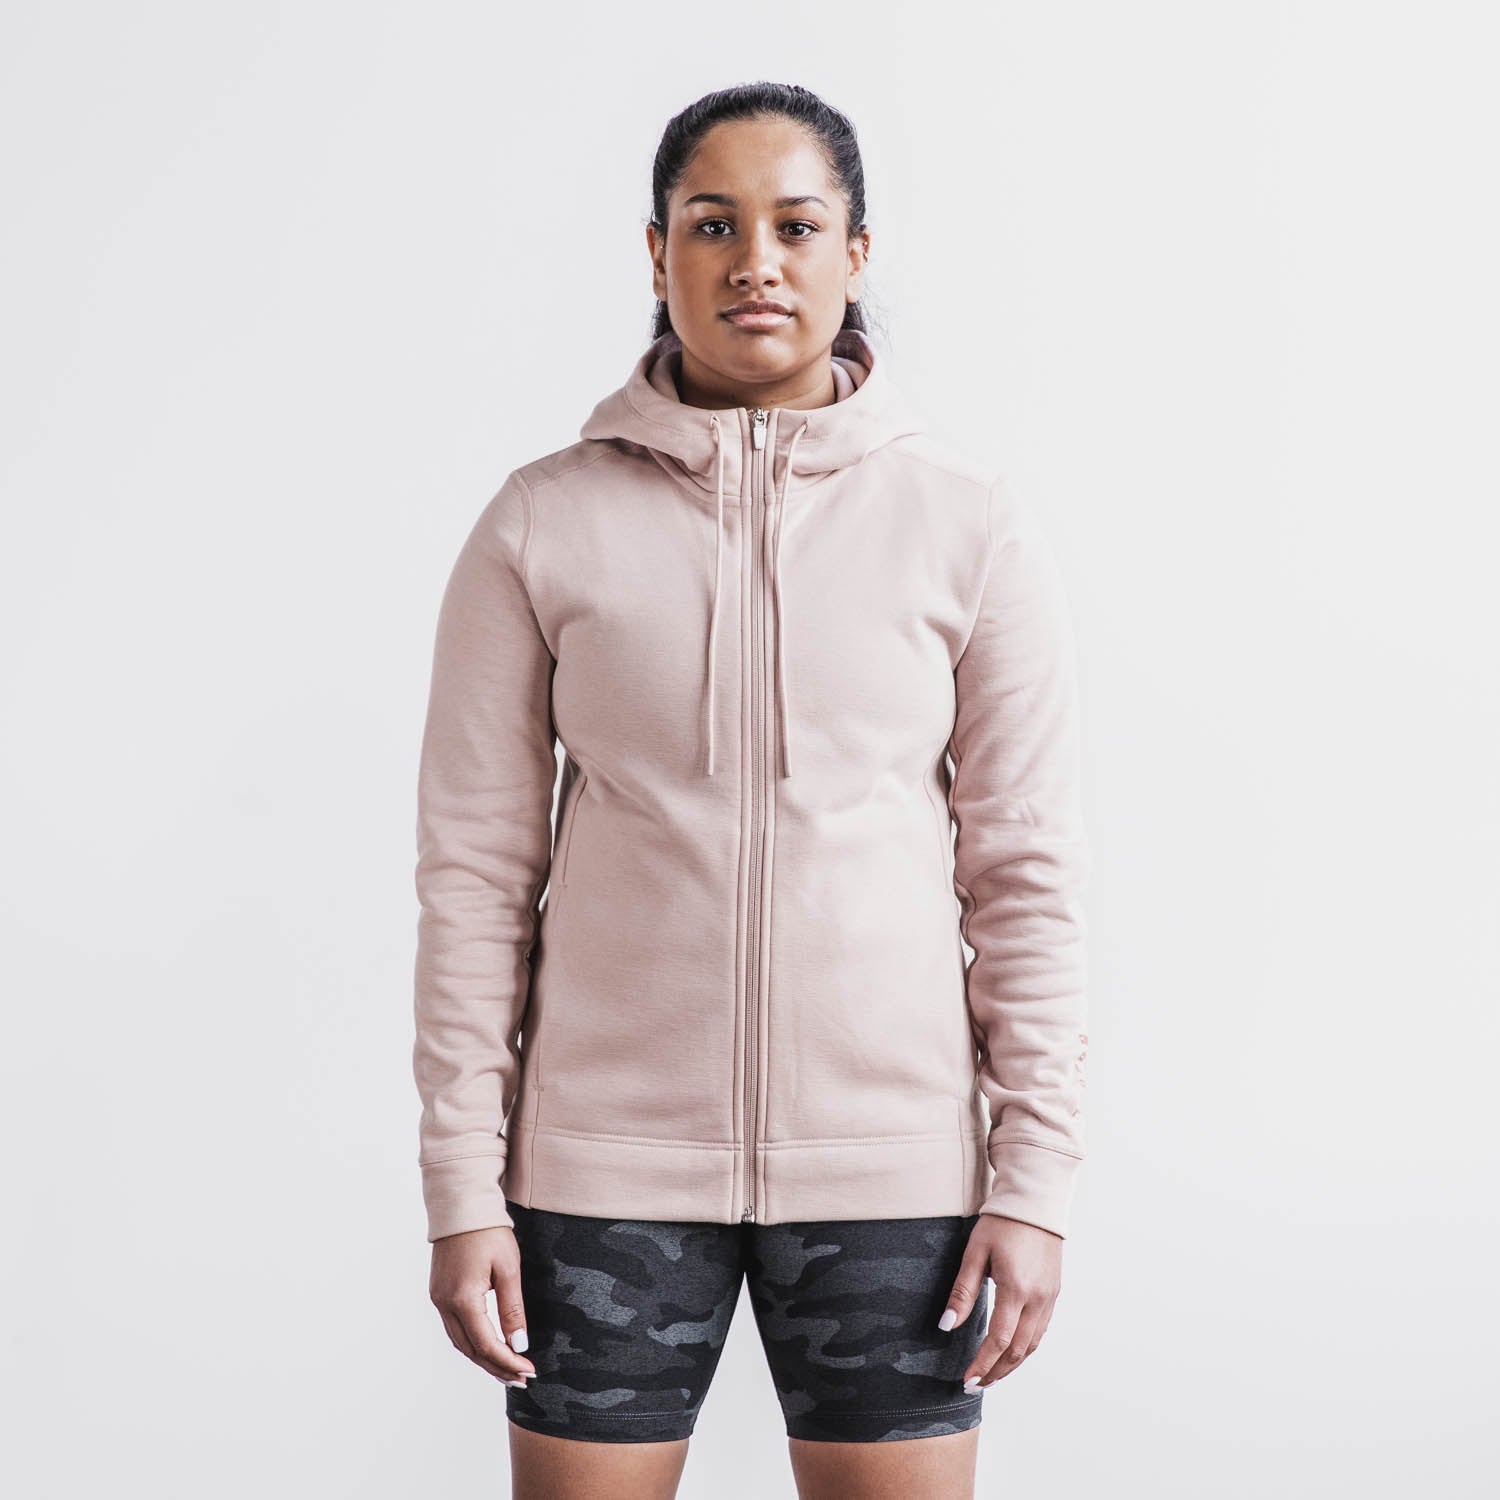 The popular oversized Scuba Hoodie from Lululemon is now under $100 